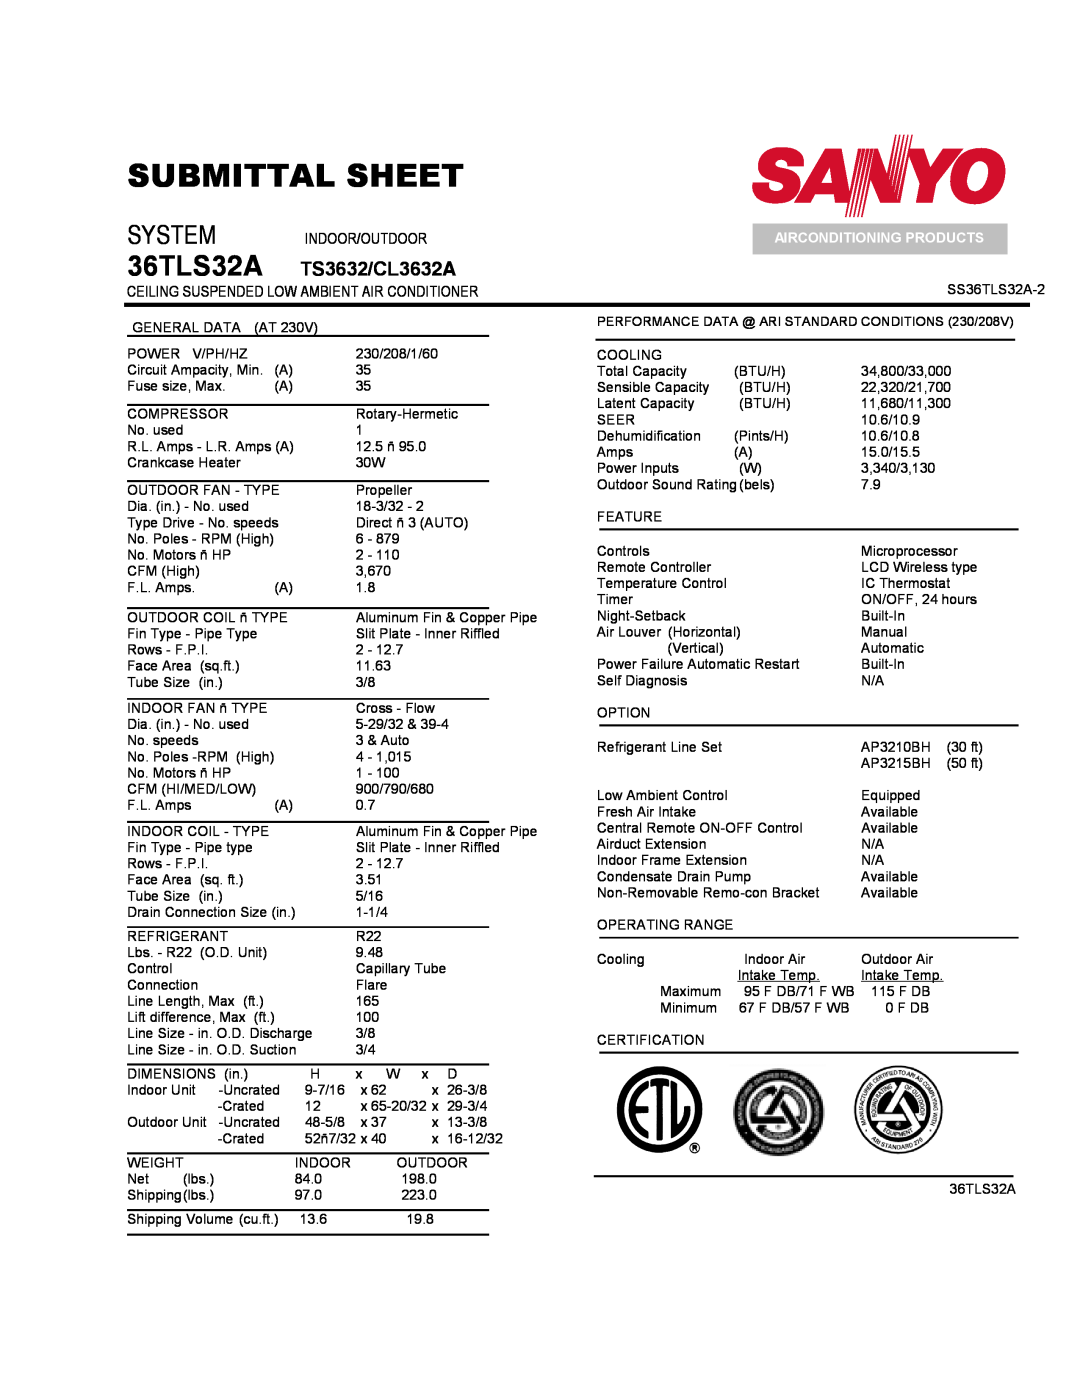 Sanyo C3632A, 36TS32A dimensions 36TLS32A TS3632/CL3632A, Ceiling Suspended Low Ambient Air Conditioner, Submittal Sheet 